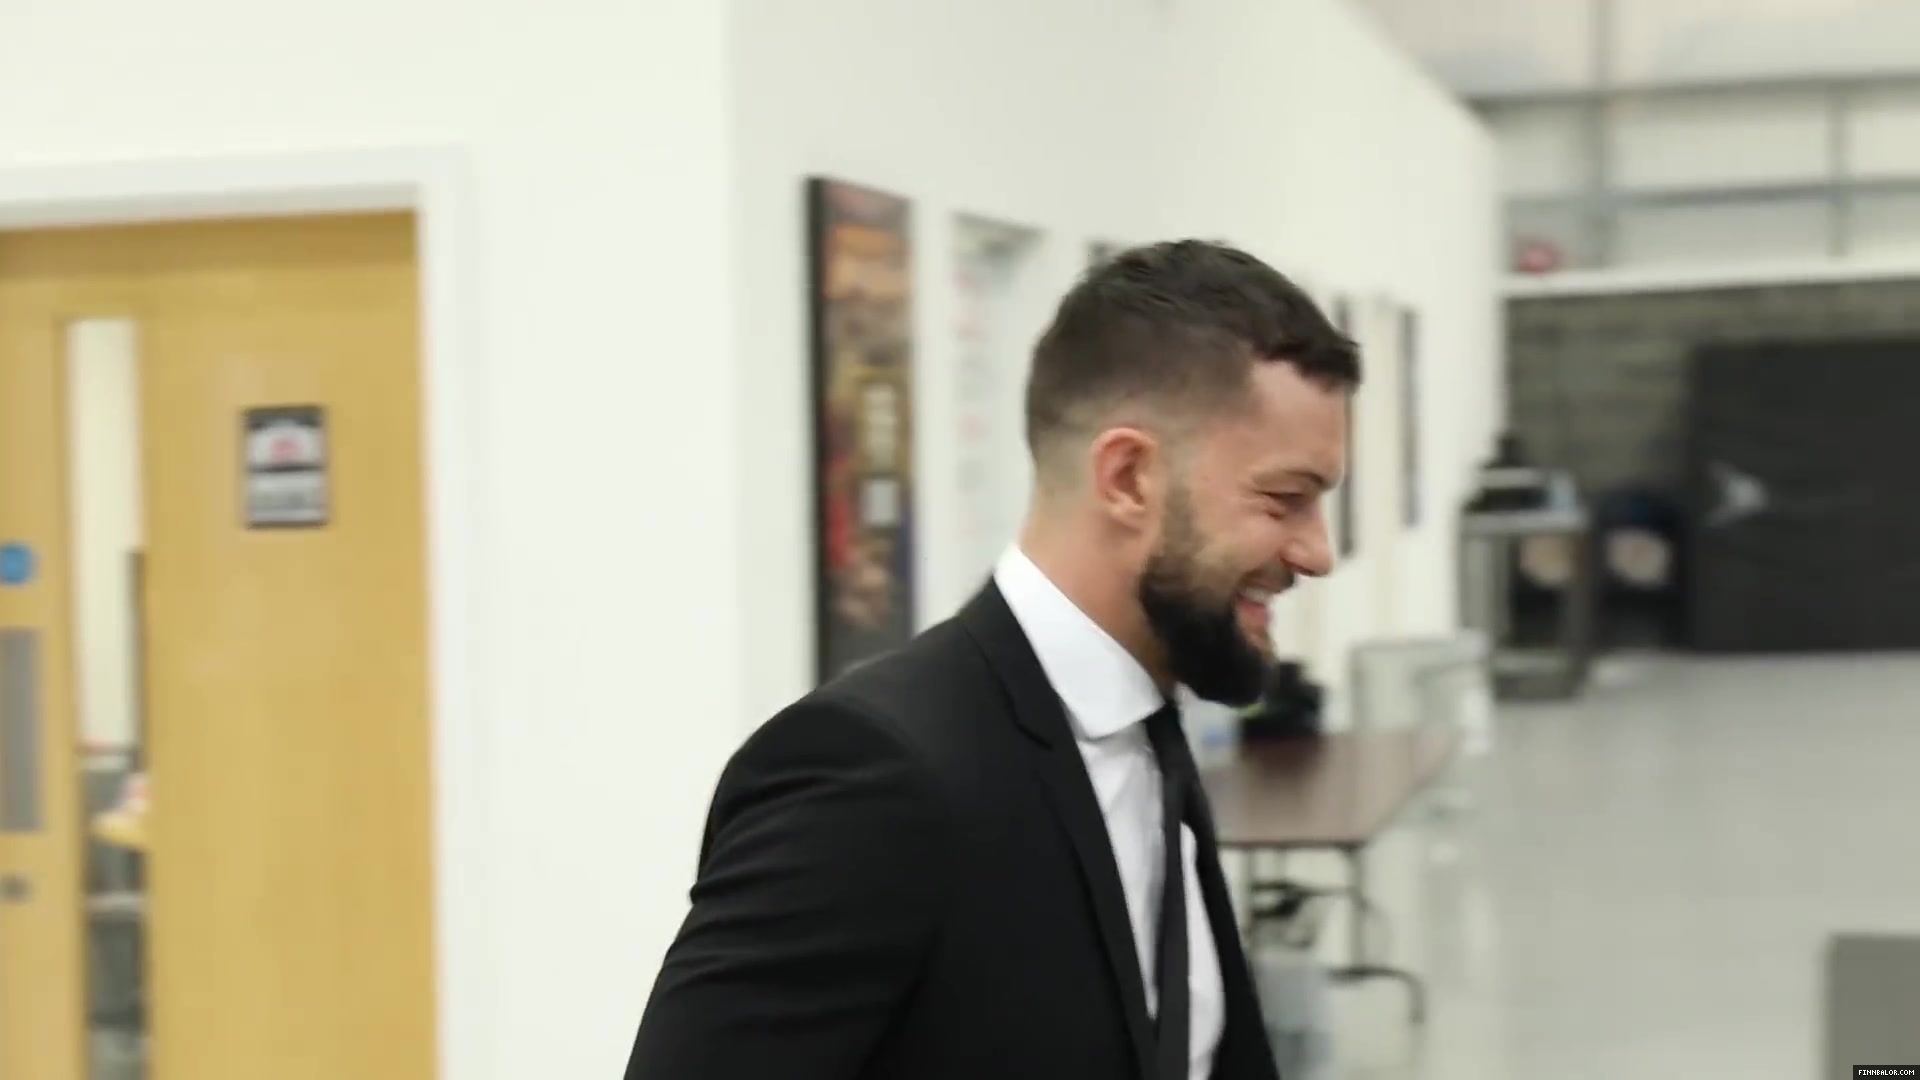 WWE_Superstar_FINN_BALOR_joins_MOUSTACHE_MOUNTAIN_at_the_opening_of_the_NXT_UK_PC_017.jpg